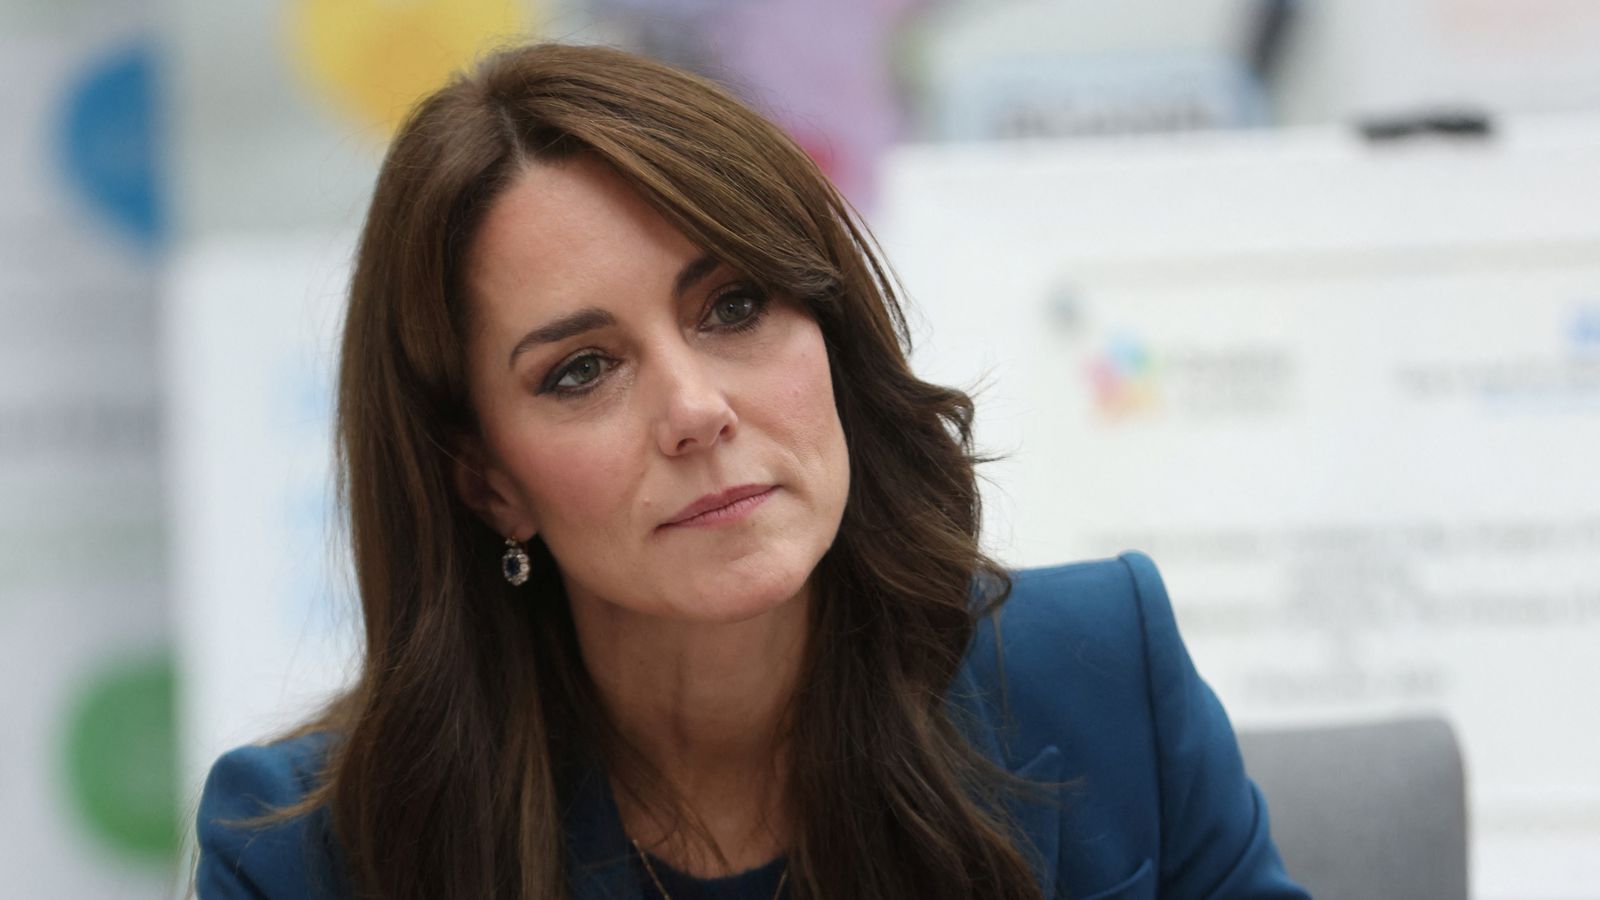 Princess Kate reveals cancer diagnosis and undergoing chemotherapy treatment